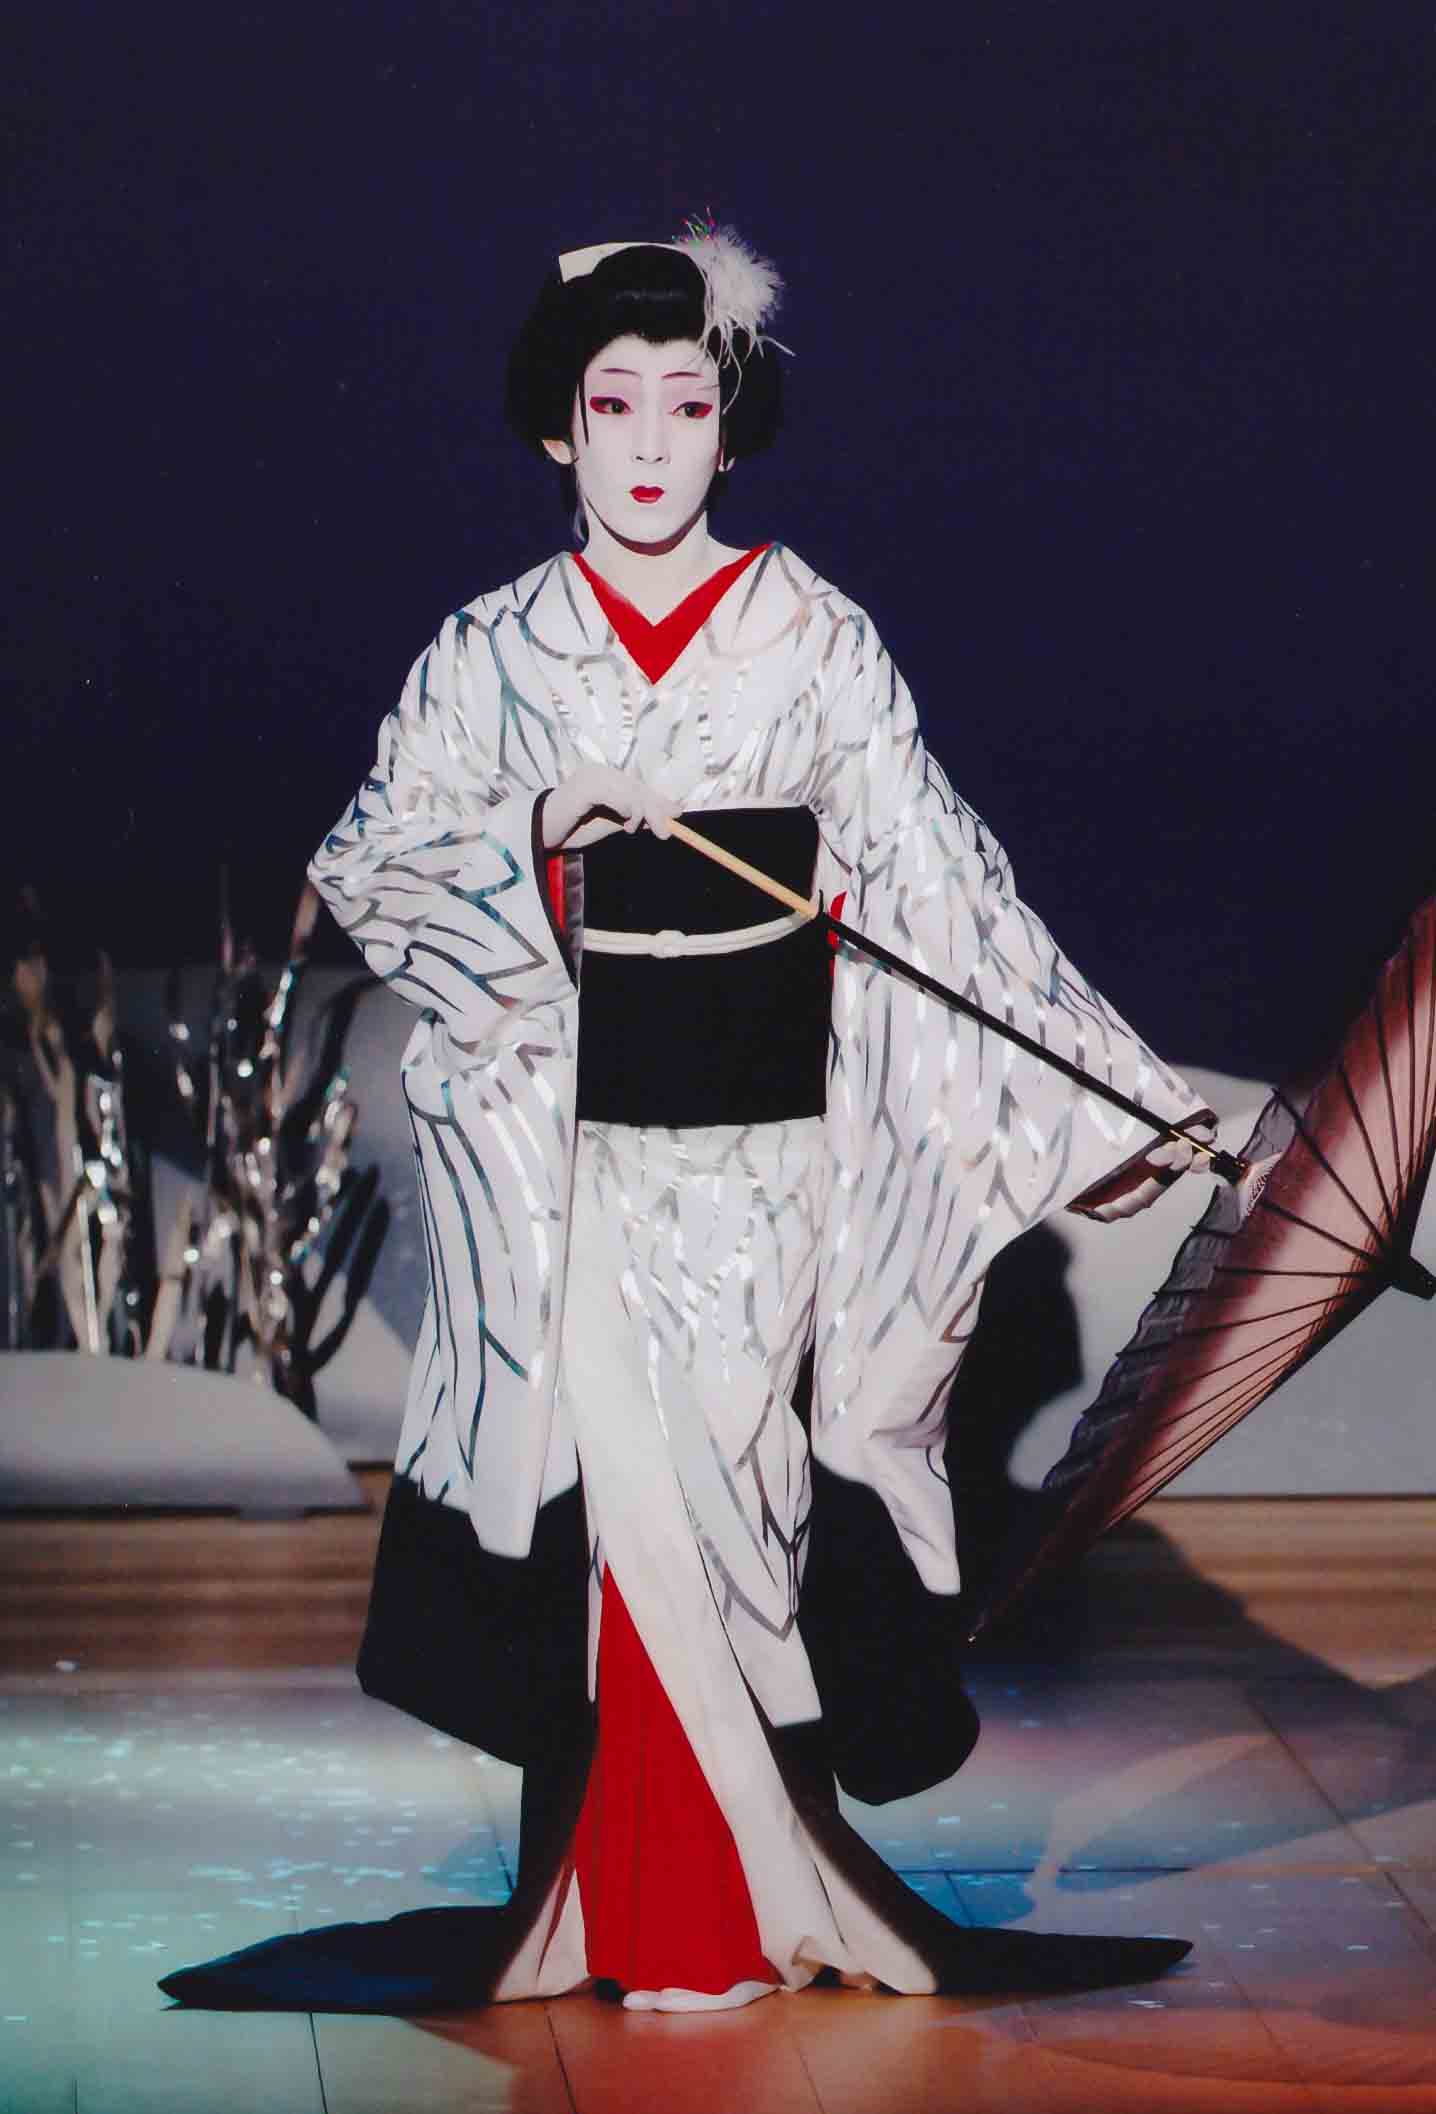 A photo of an onnagata performer. The actor is onstage in full dress, hair, and make up, holding an umbrella to the side.